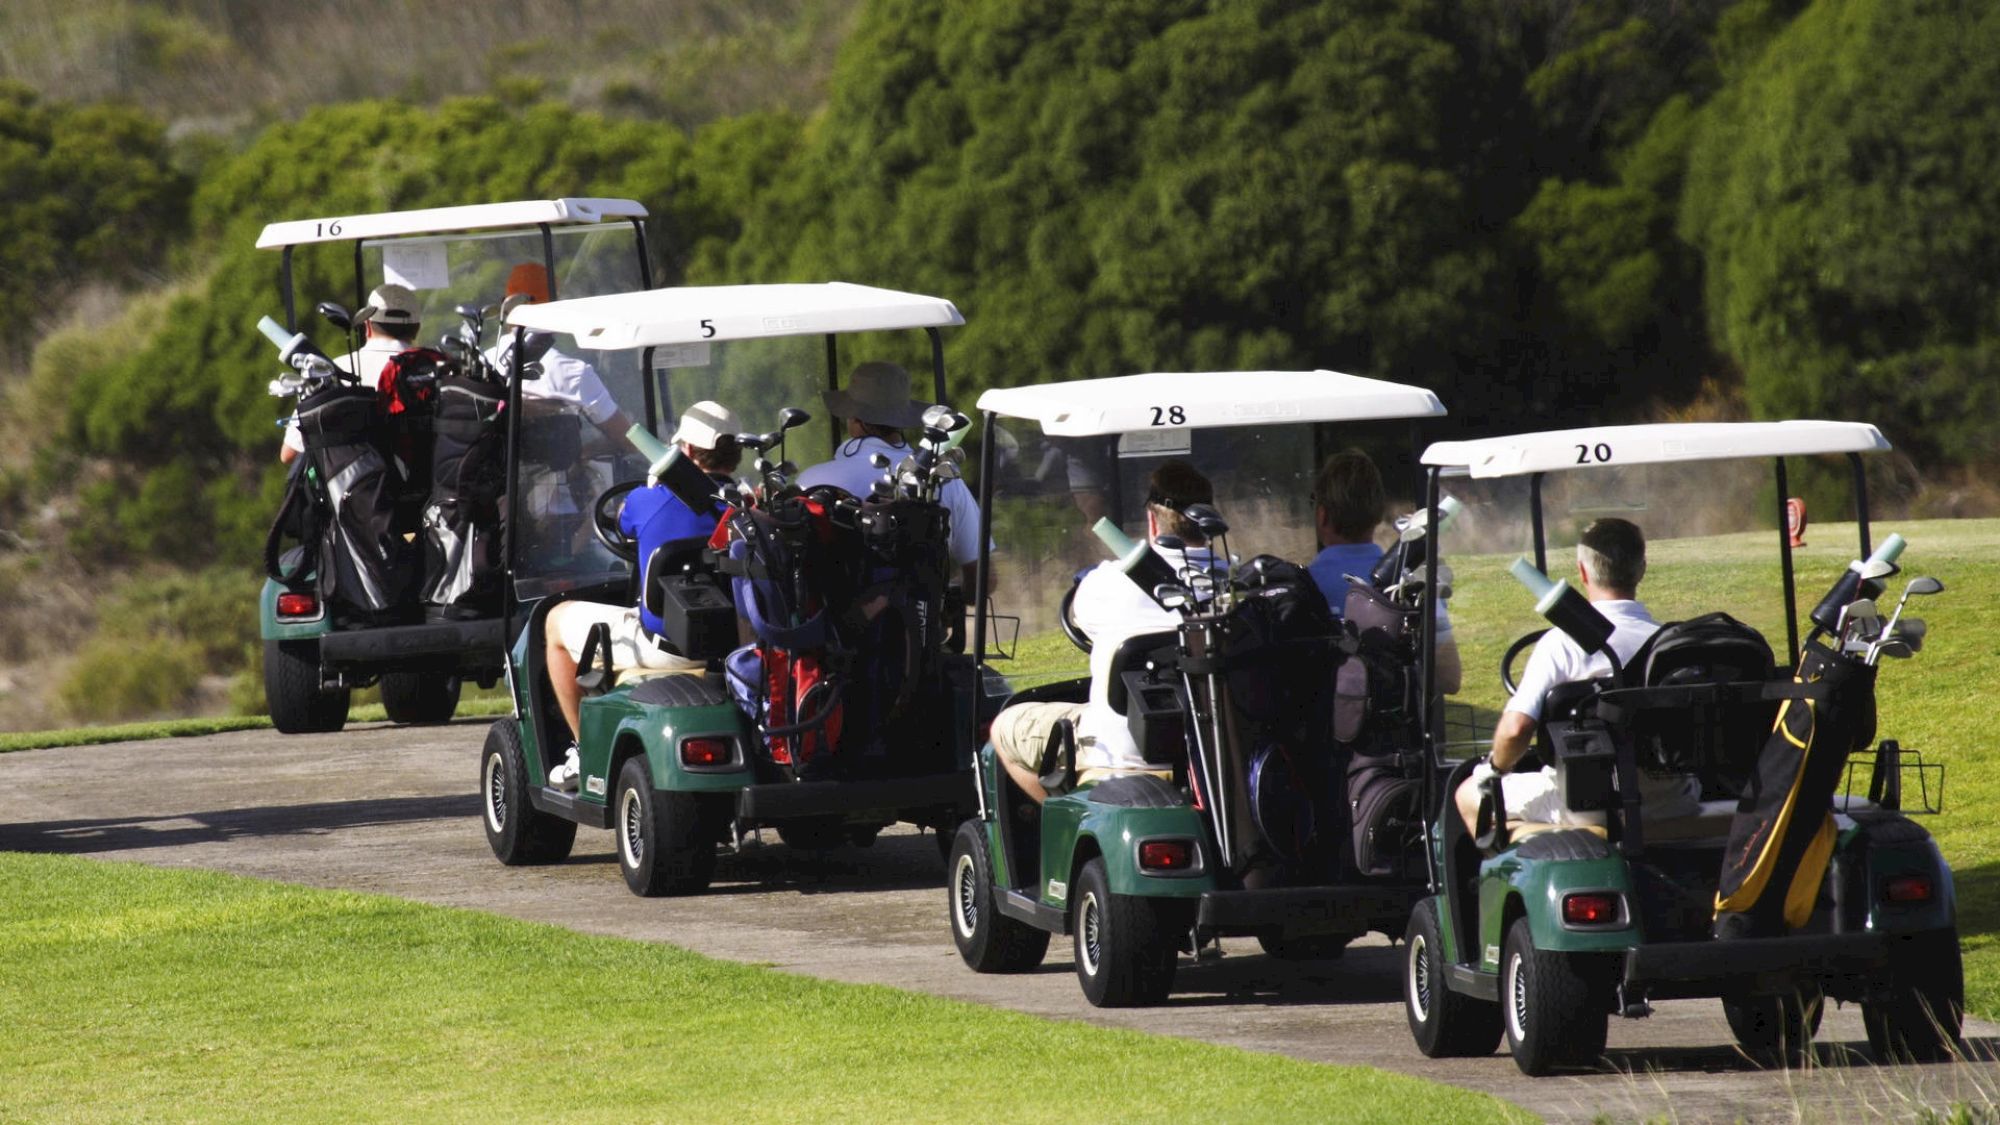 People riding in golf carts on a golf course, with golf bags visible at the back of the carts and lush greenery in the background.